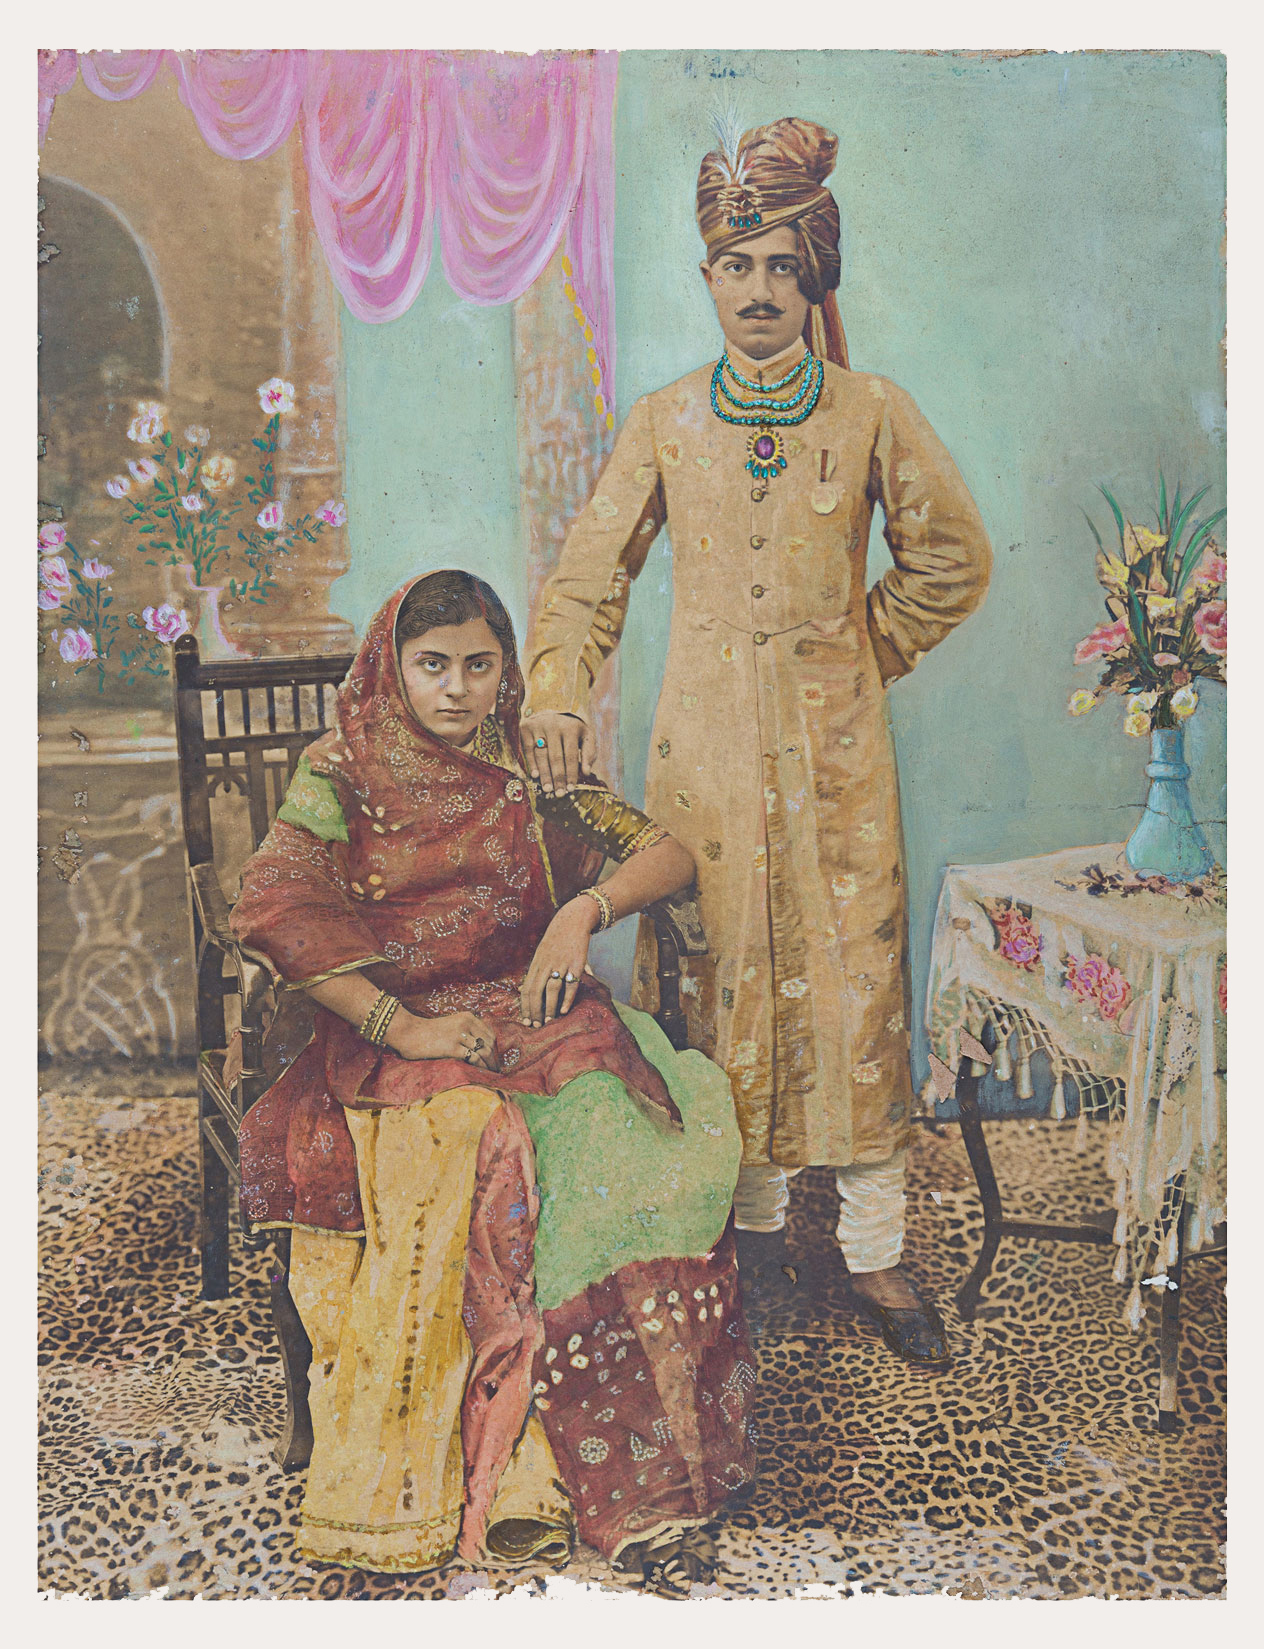 A woman looks directly at us while comfortably seated on a chair. A man wearing an intricate turban and jewelry is standing next to her, with his right hand on her shoulder. They are in an enclosed space which is upholstered with a carpet with leopard skin design.